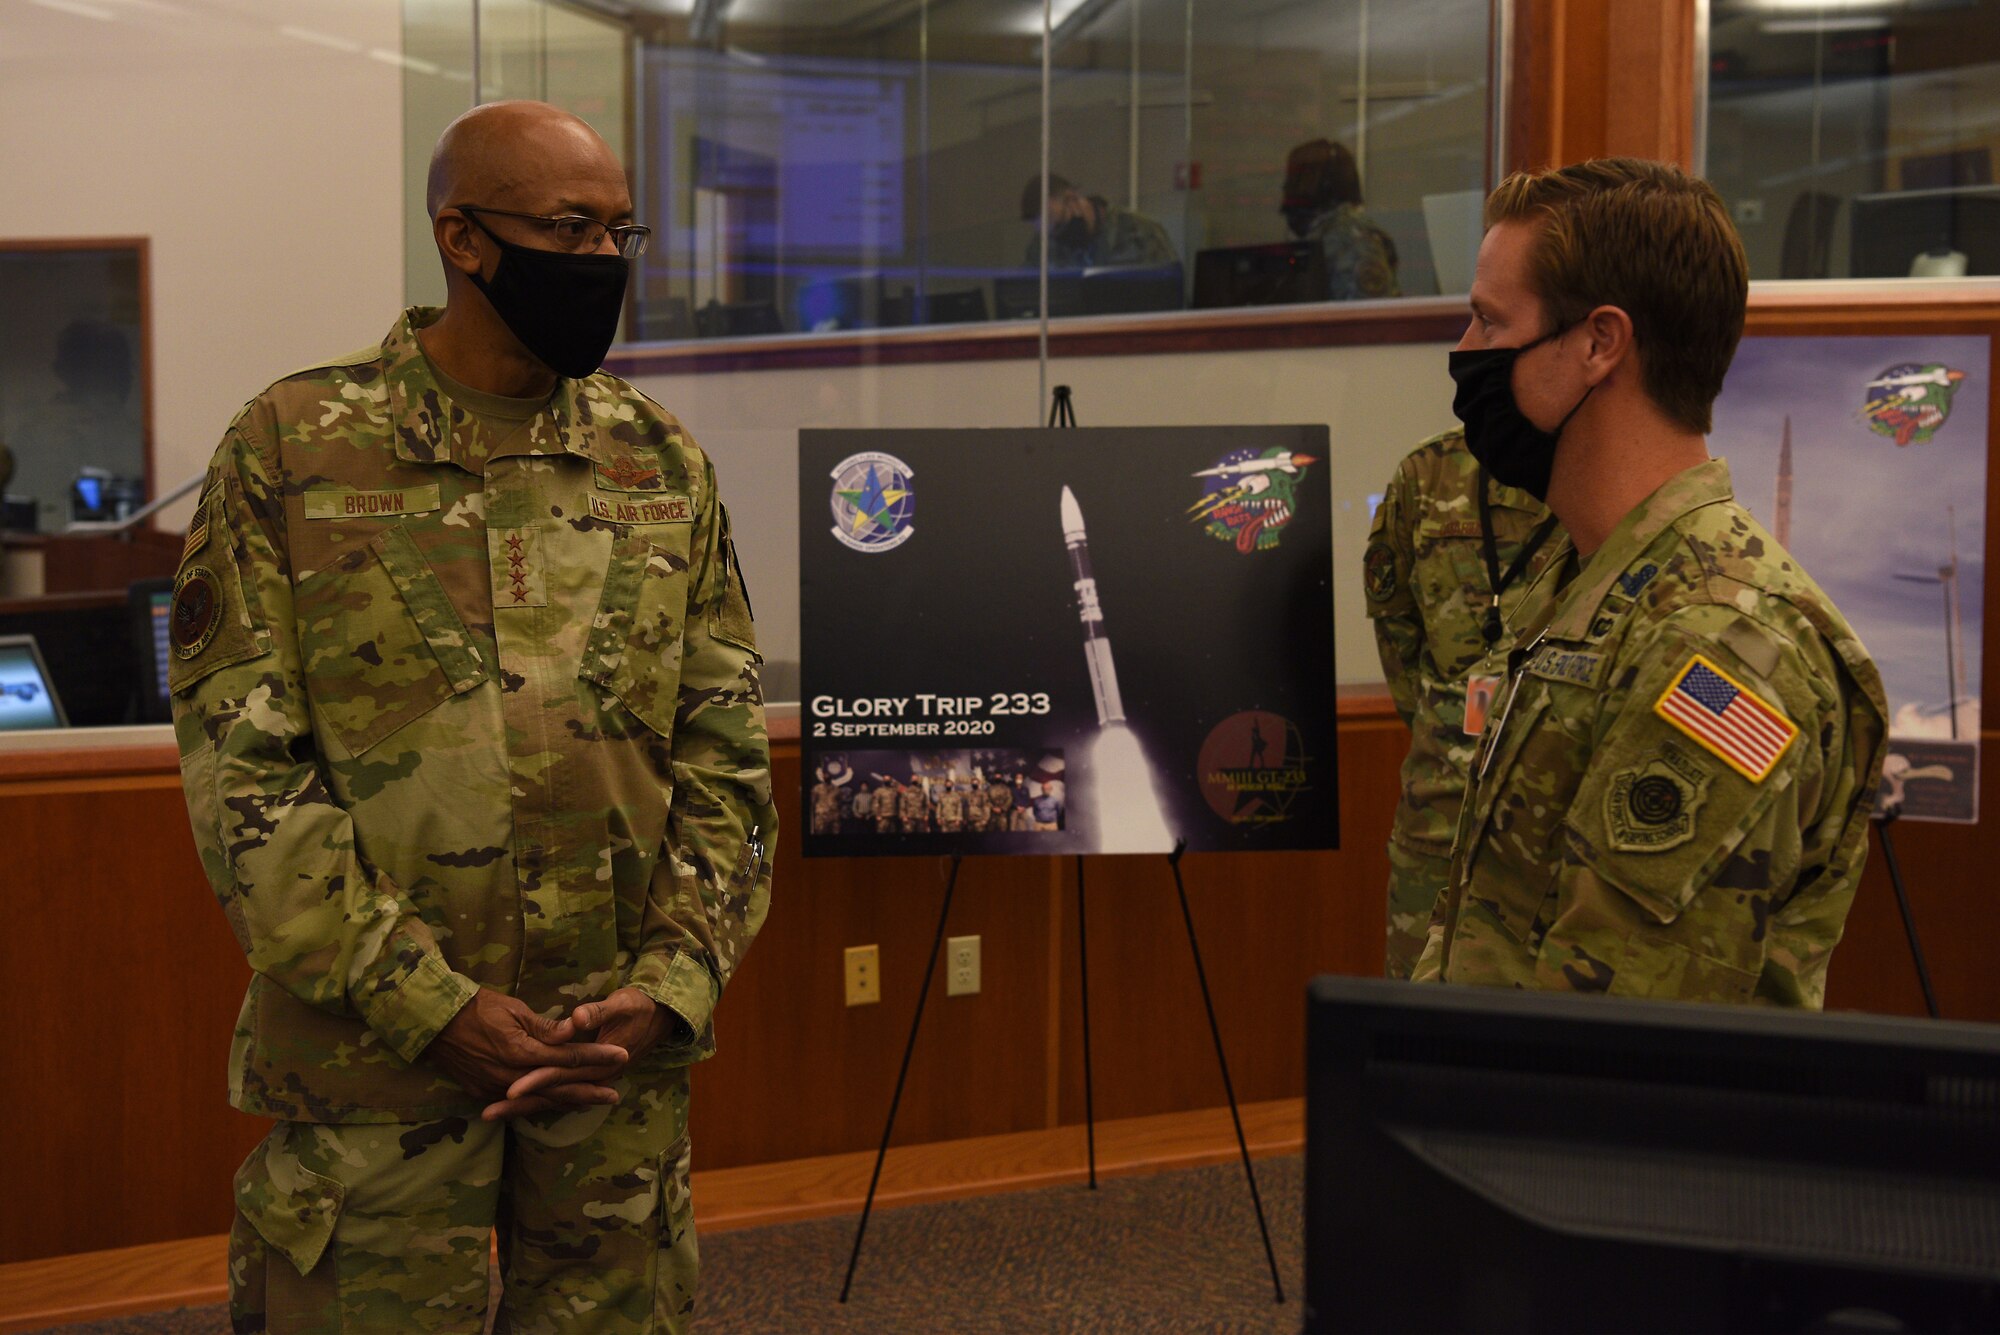 U.S Air Force Chief of Staff Gen. Charles Q. Brown, Jr., speaks with Lt. Col. Sean Ianacone, 2nd Range Operations Squadron commander, while visiting the Western Range Operations Control Center Oct. 27, 2020, at Vandenberg Air Force Base, Calif.